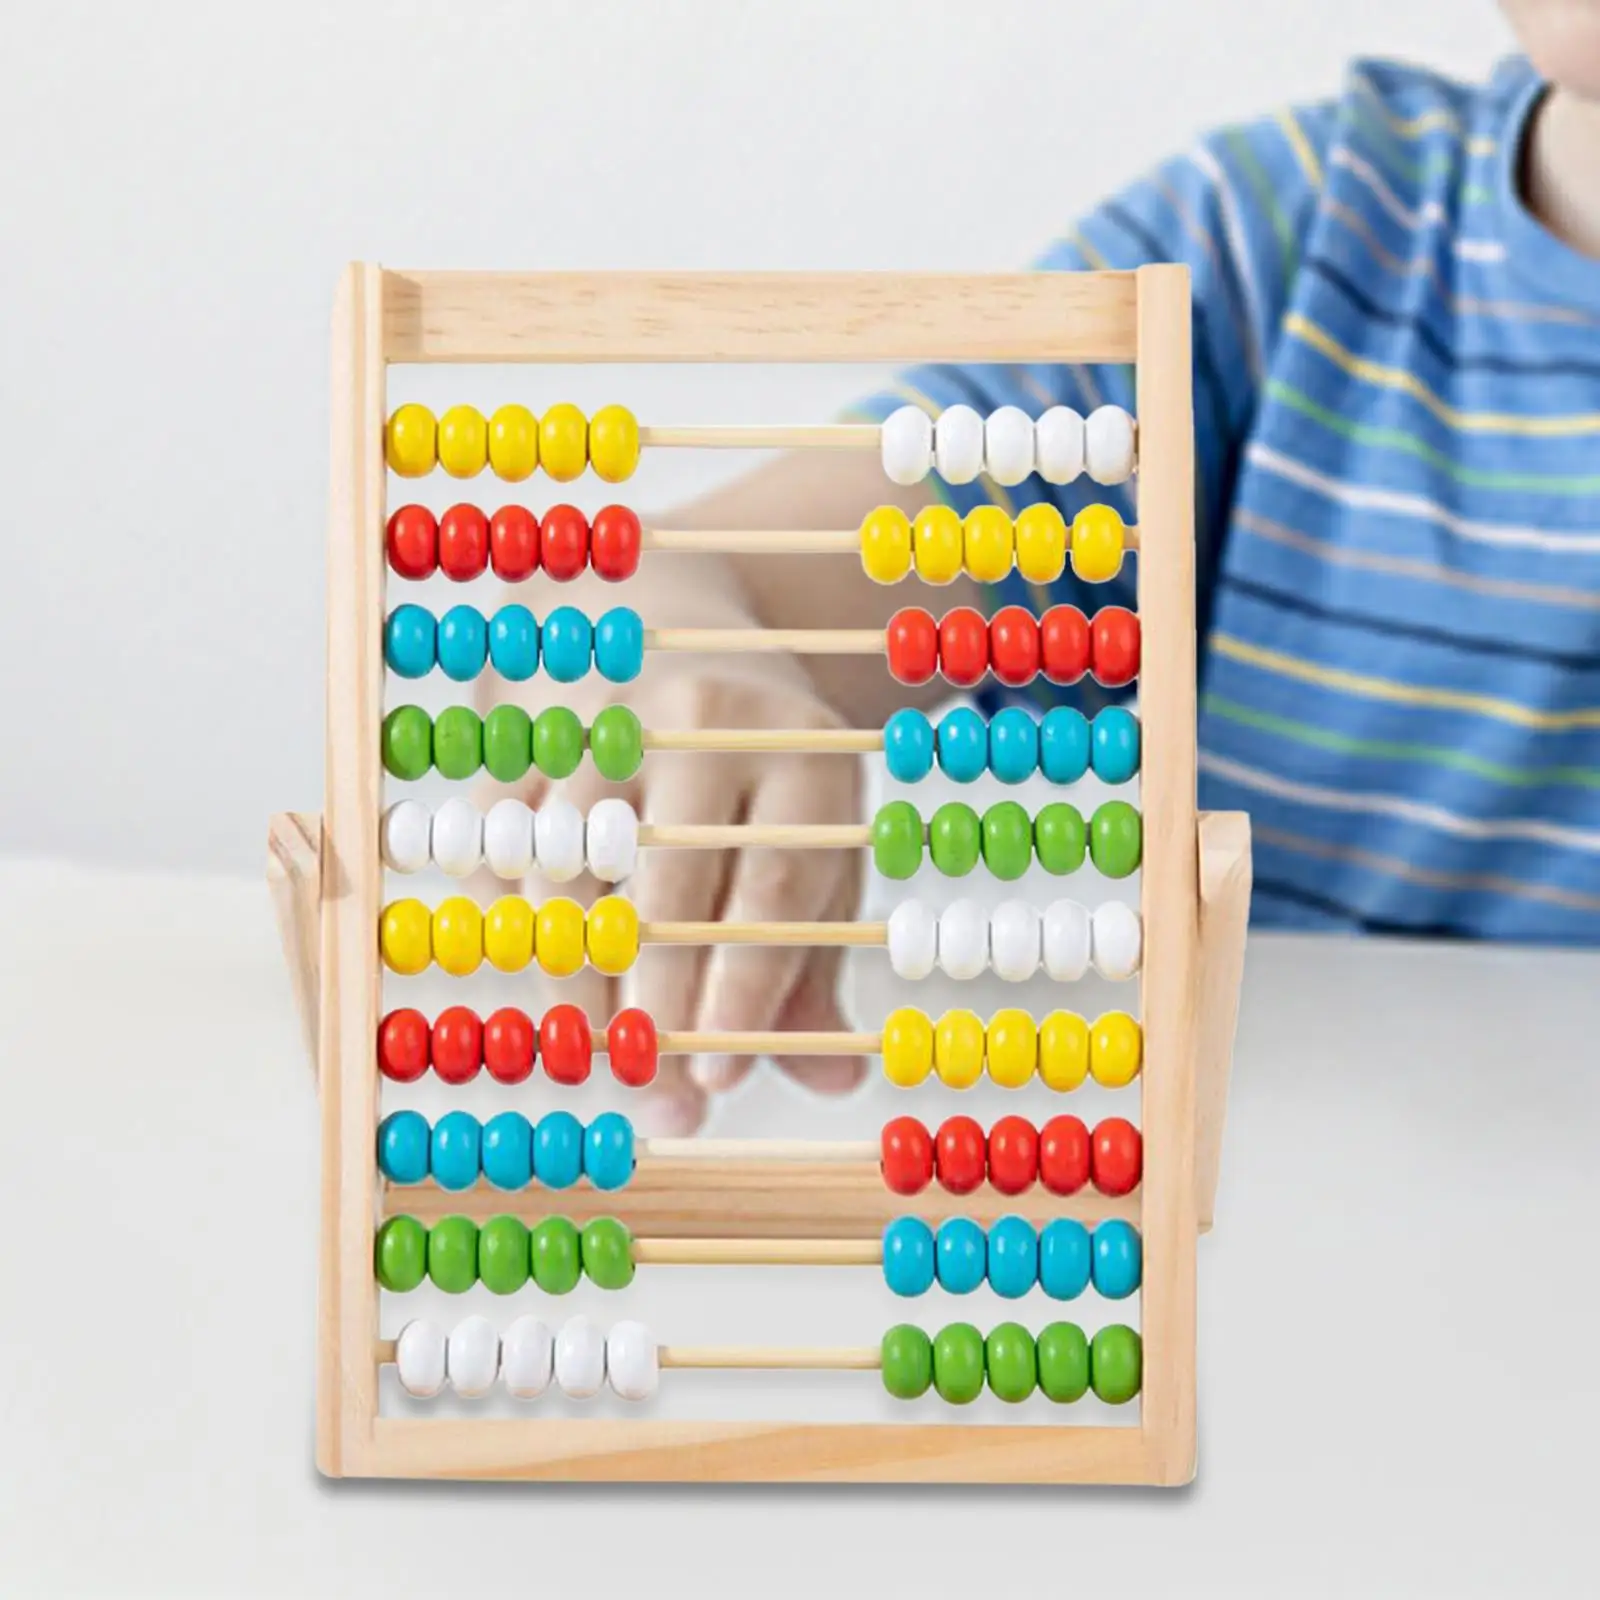 Wooden Abacus Educational Counting Frames Toy Montessori Gifts 100 Beads Math Tool 10 Rows Abacus for Preschool Toddlers